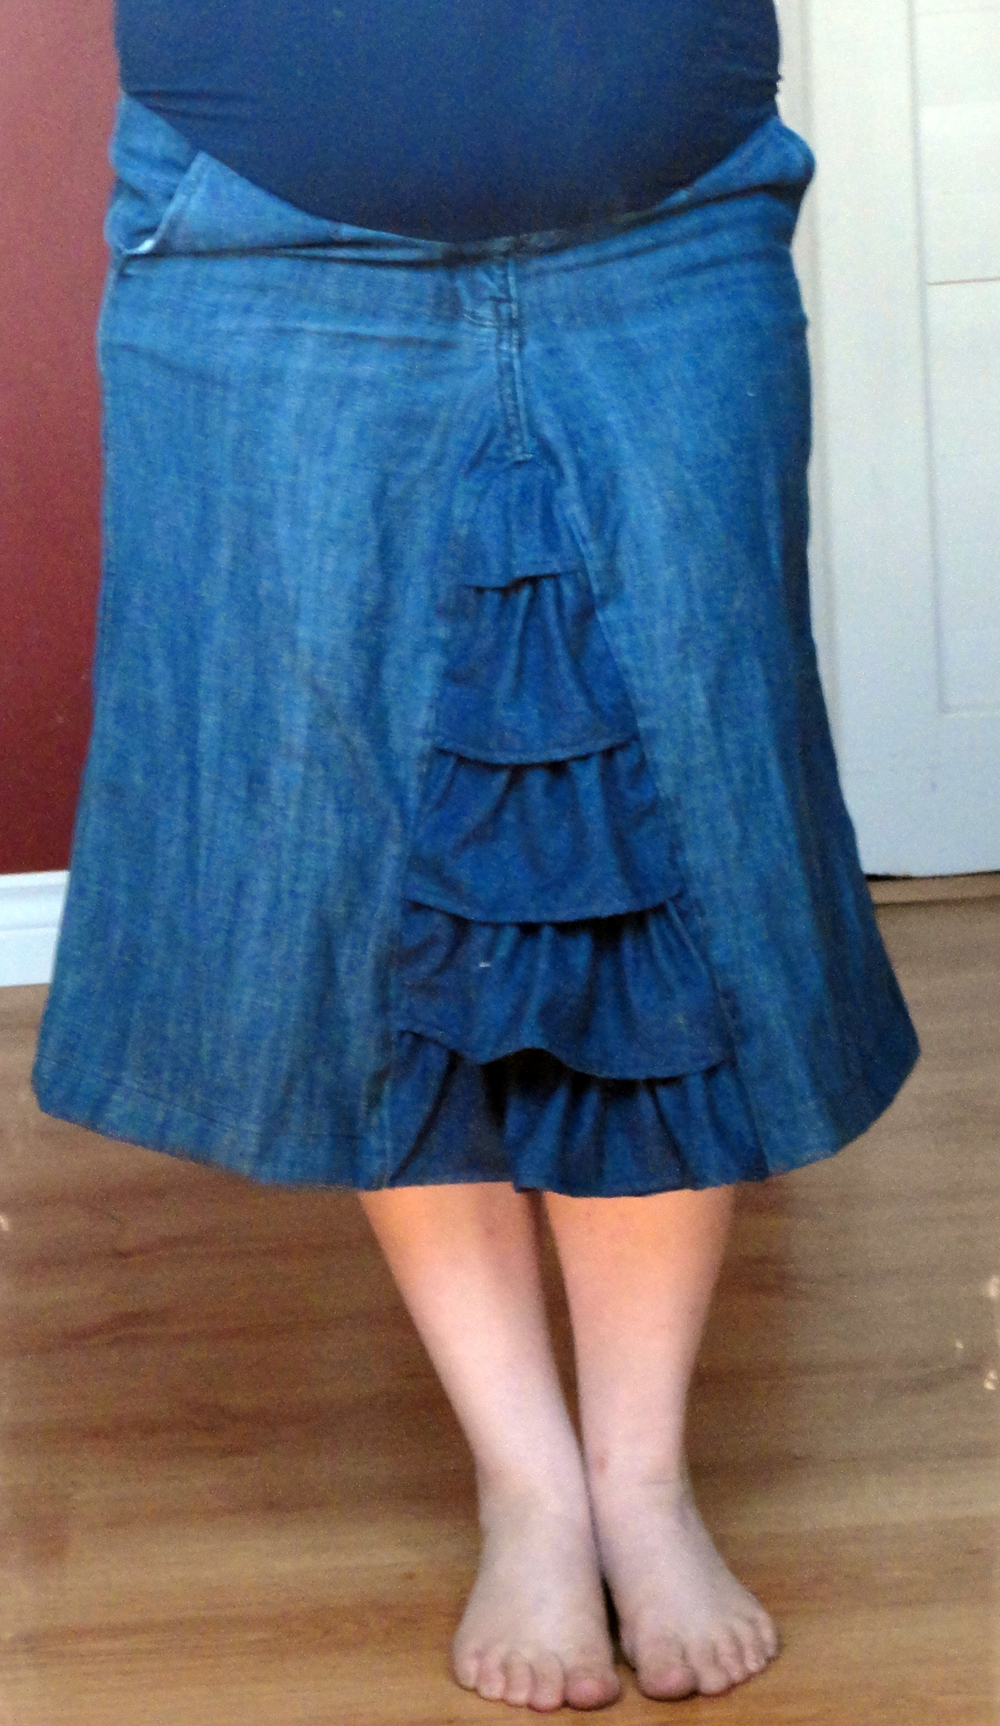 Sew A Ruffled Maternity Skirt from Jeans | The DIY Mommy